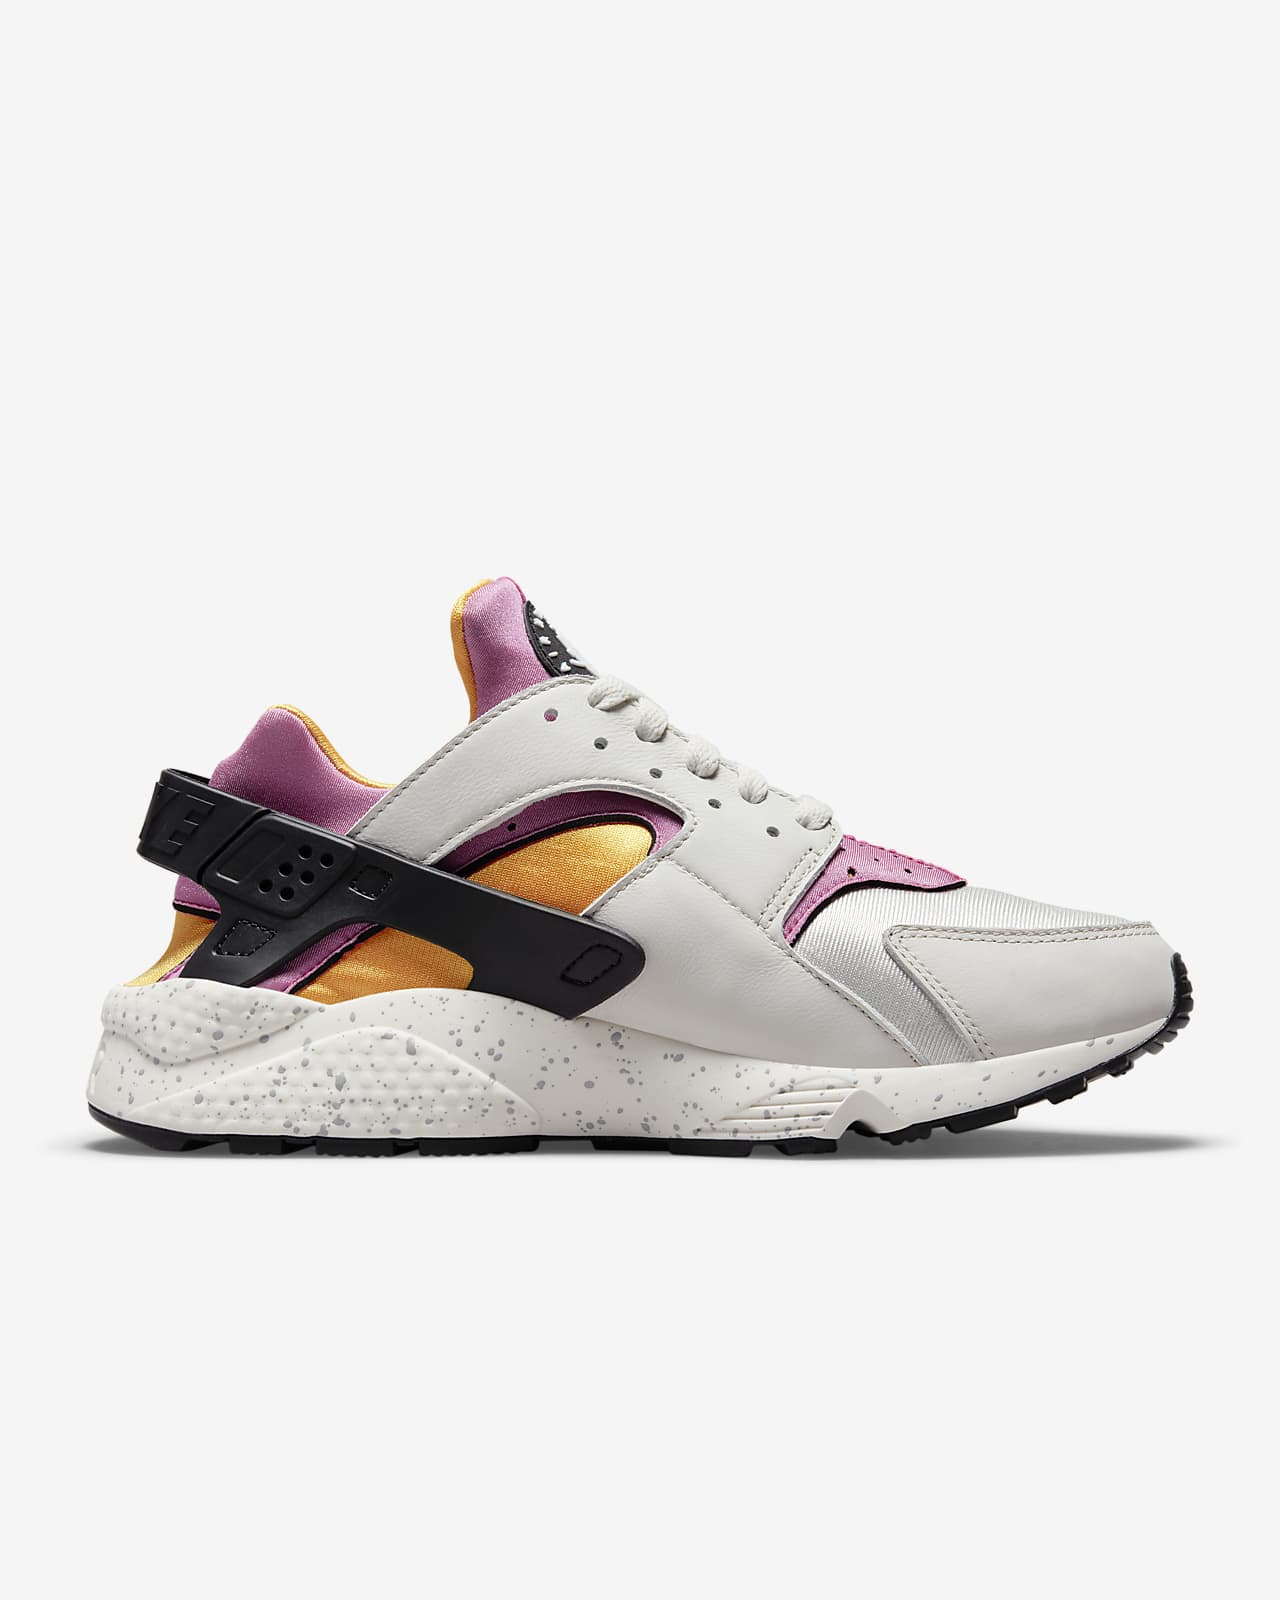 Detector leftovers mechanical Chaussure Nike Air Huarache pour Homme. Nike FR